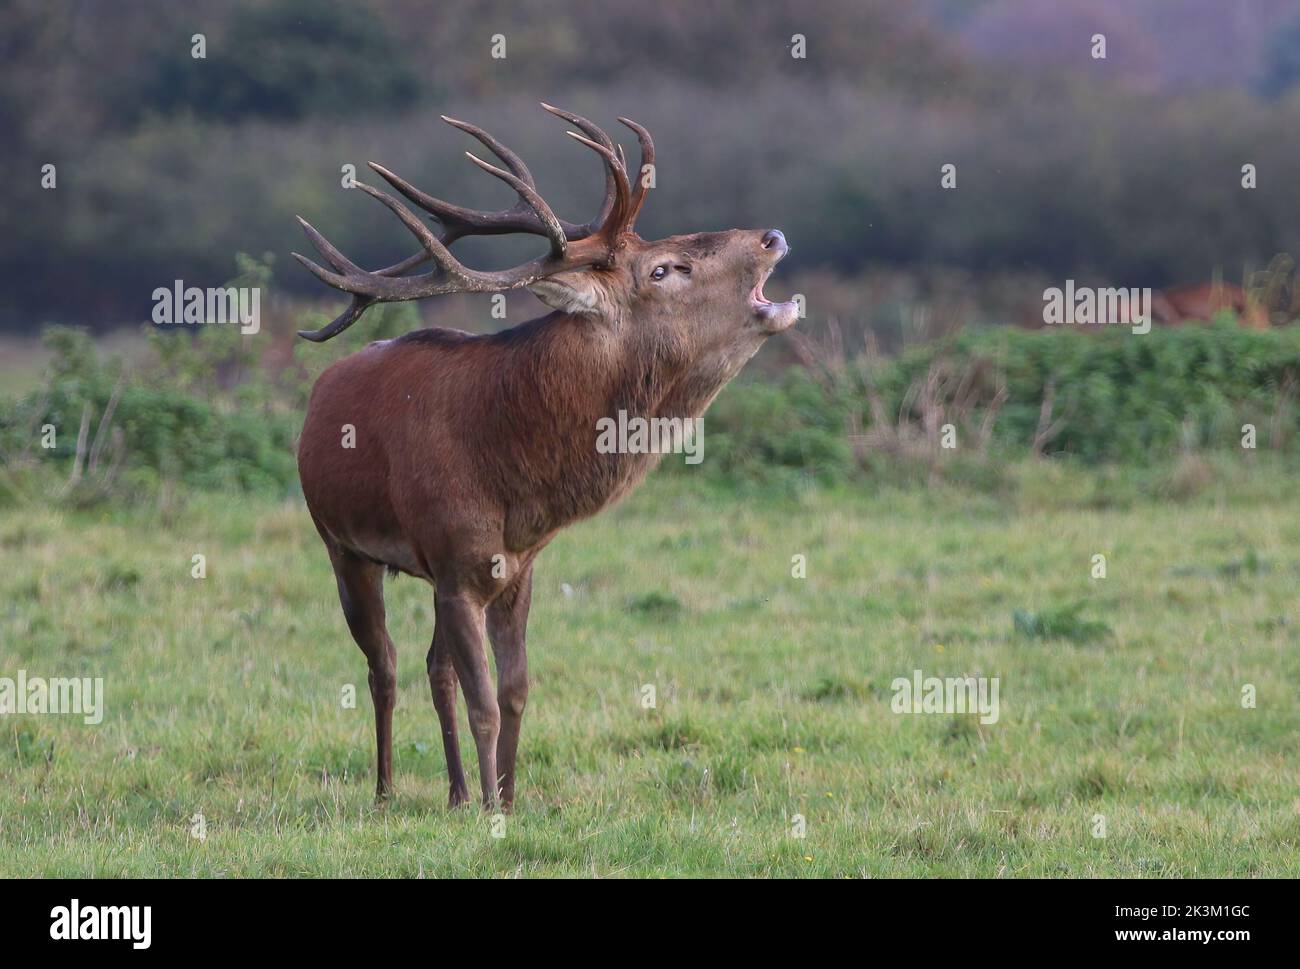 A majestic Red Deer Stag (Cervus elaphus) with enormous antlers. Roaring and posturing during the rutting season. Suffolk,  UK. Stock Photo